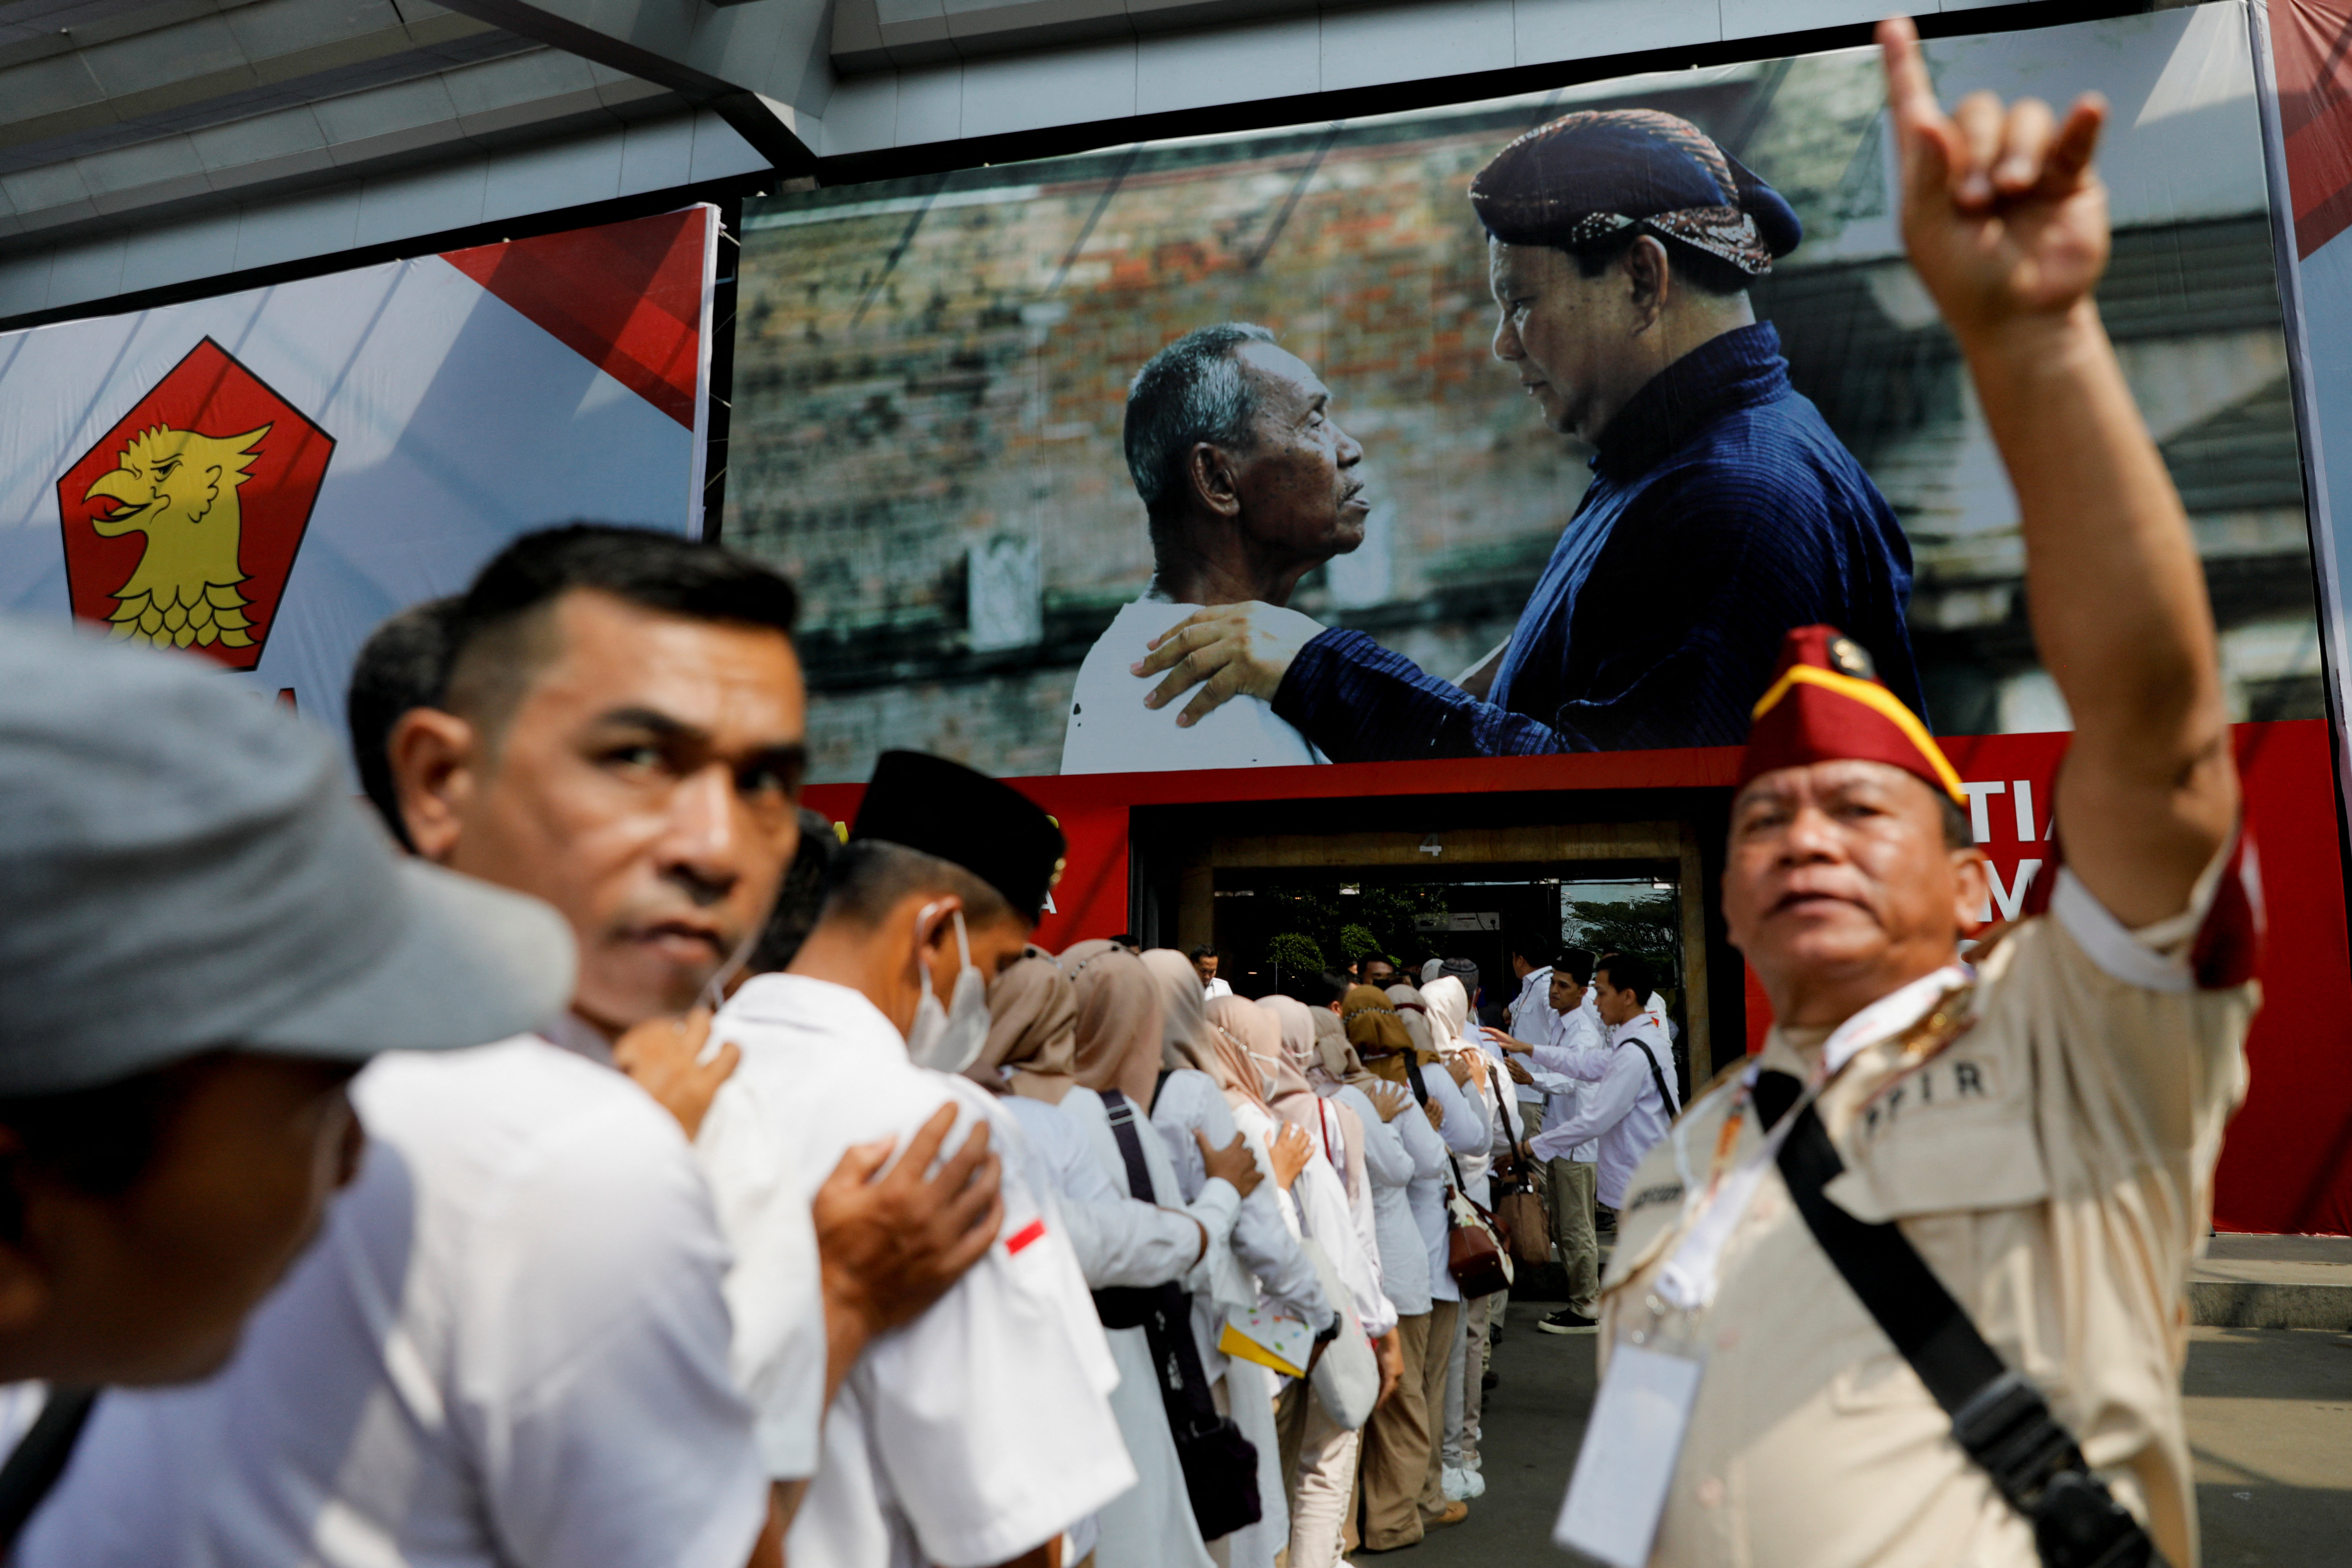 Gerindra Party's members queue to enter the venue of the national meeting of its leaders as a picture of Prabowo Subianto is seen in the background, in Bogor